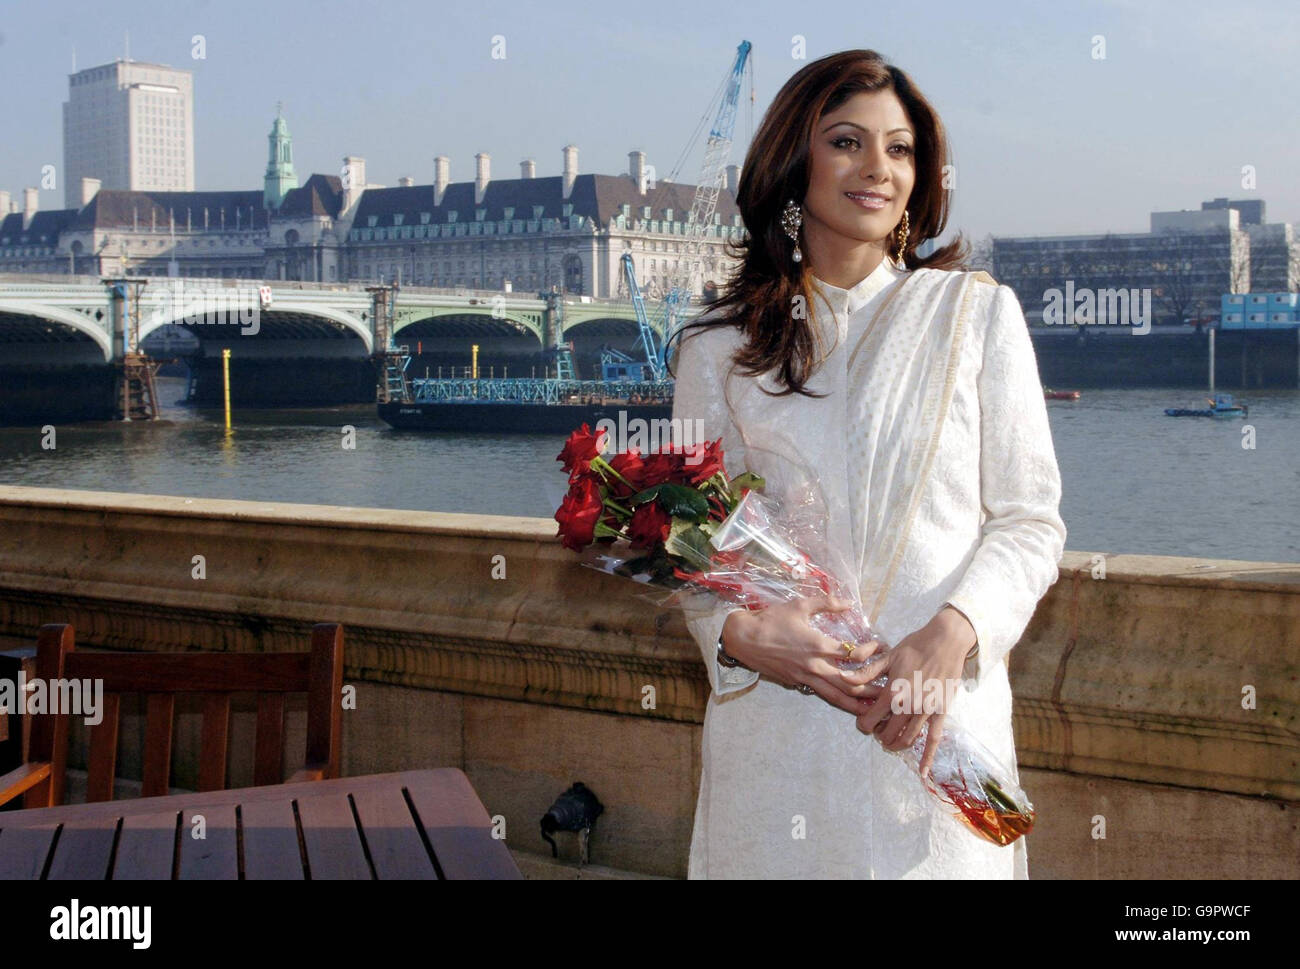 Celebrity Big Brother winner Shilpa Shetty stands on the terrace at the Houses of Parliament in central London. Stock Photo